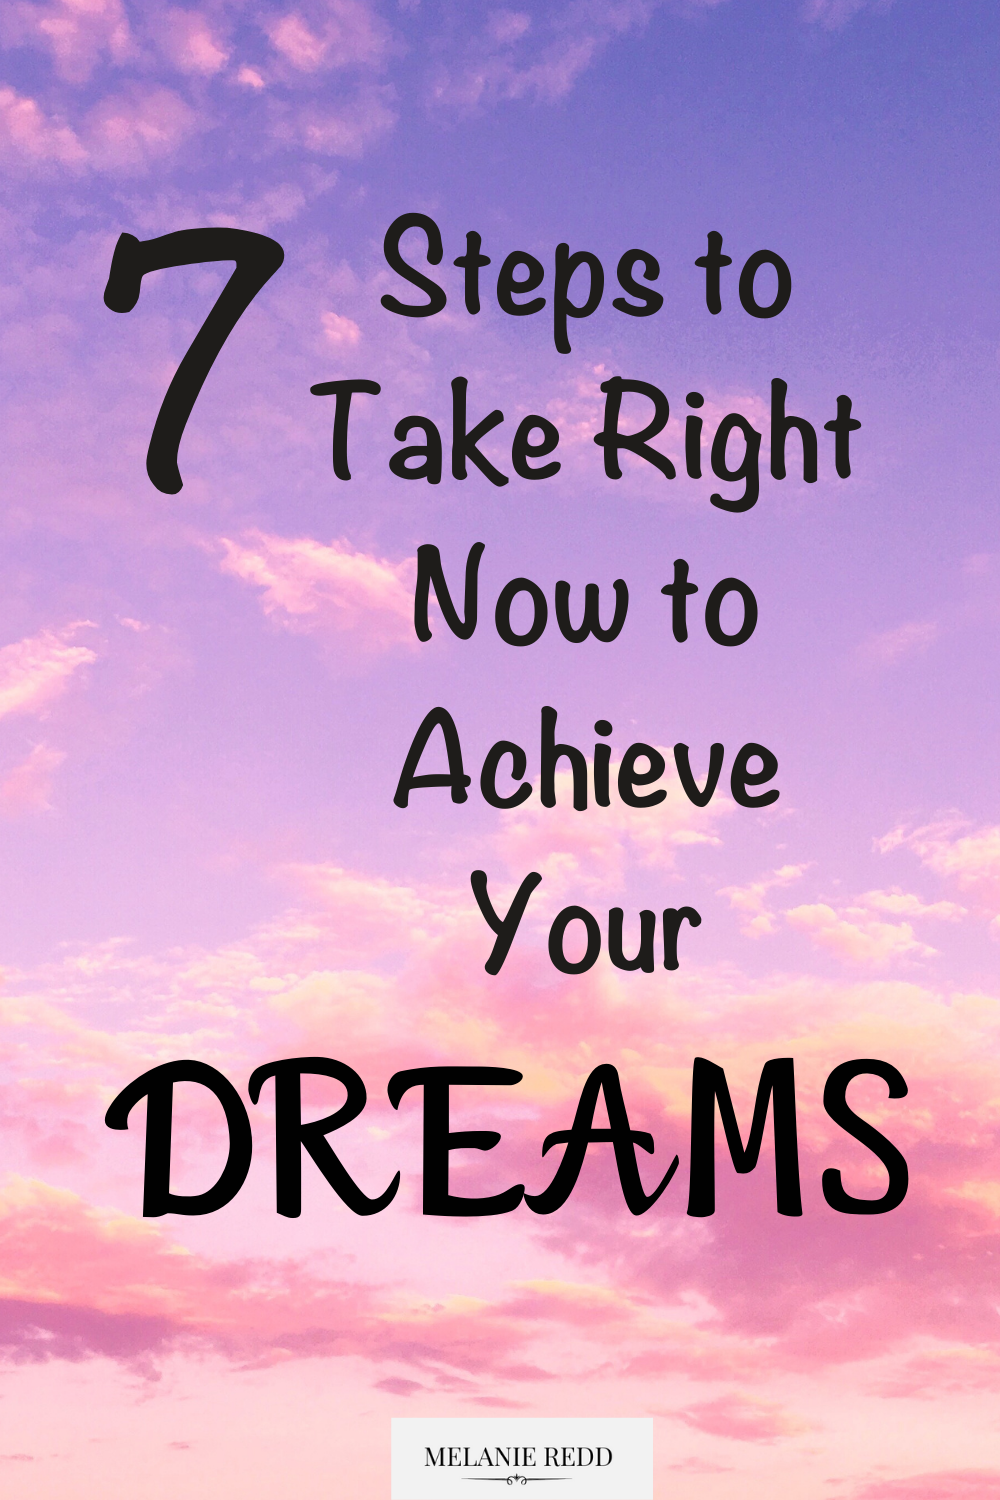 As you look to the future, what are you trying to accomplish? Do? Complete? Here are 7 steps to take right now to achieve your dreams.